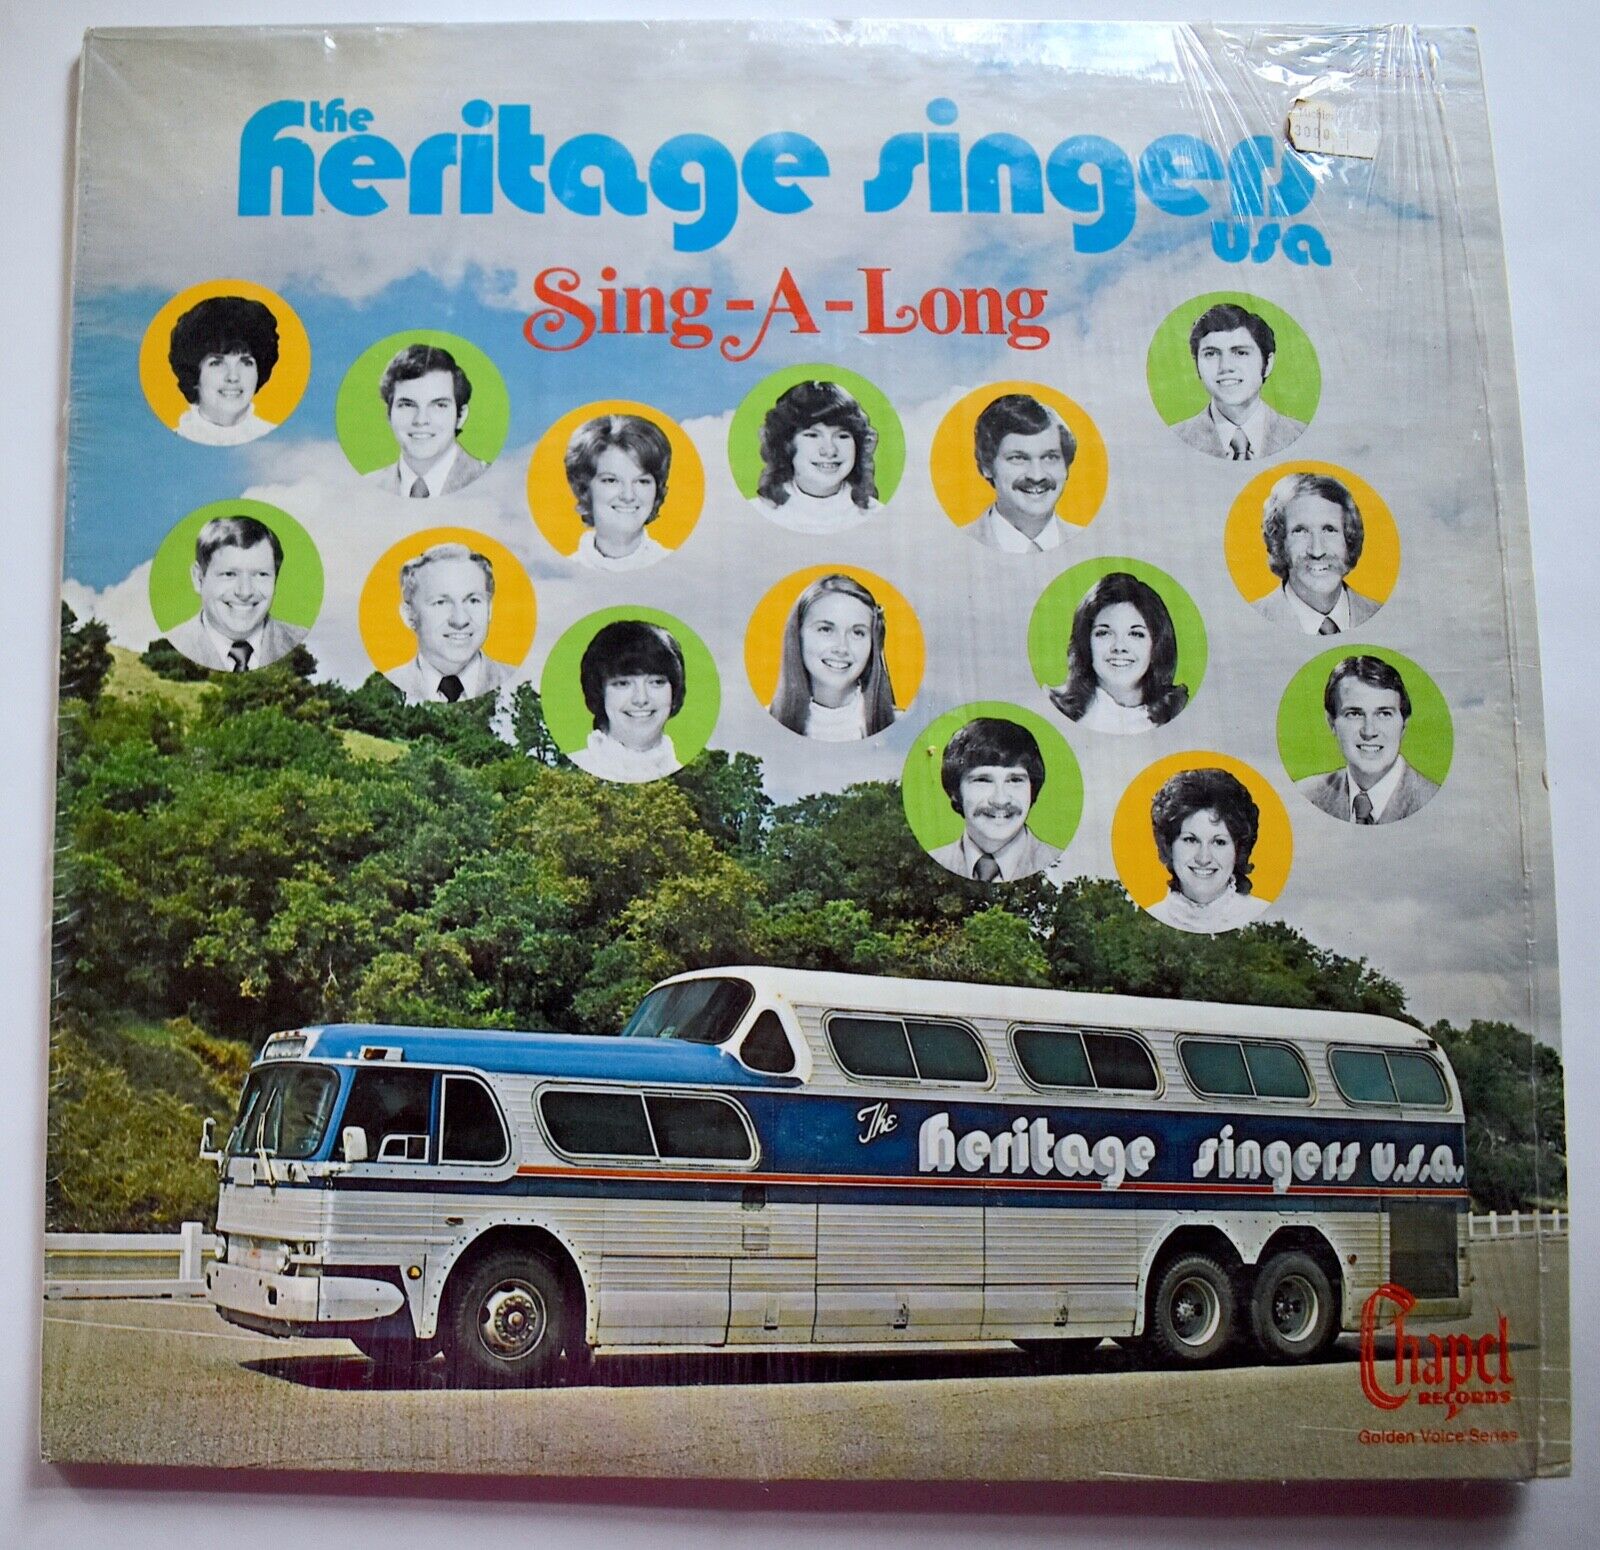 Vintage Heritage Singers USA Sing-A-Long Vinyl 33 LP Record in Plastic FreeS&H